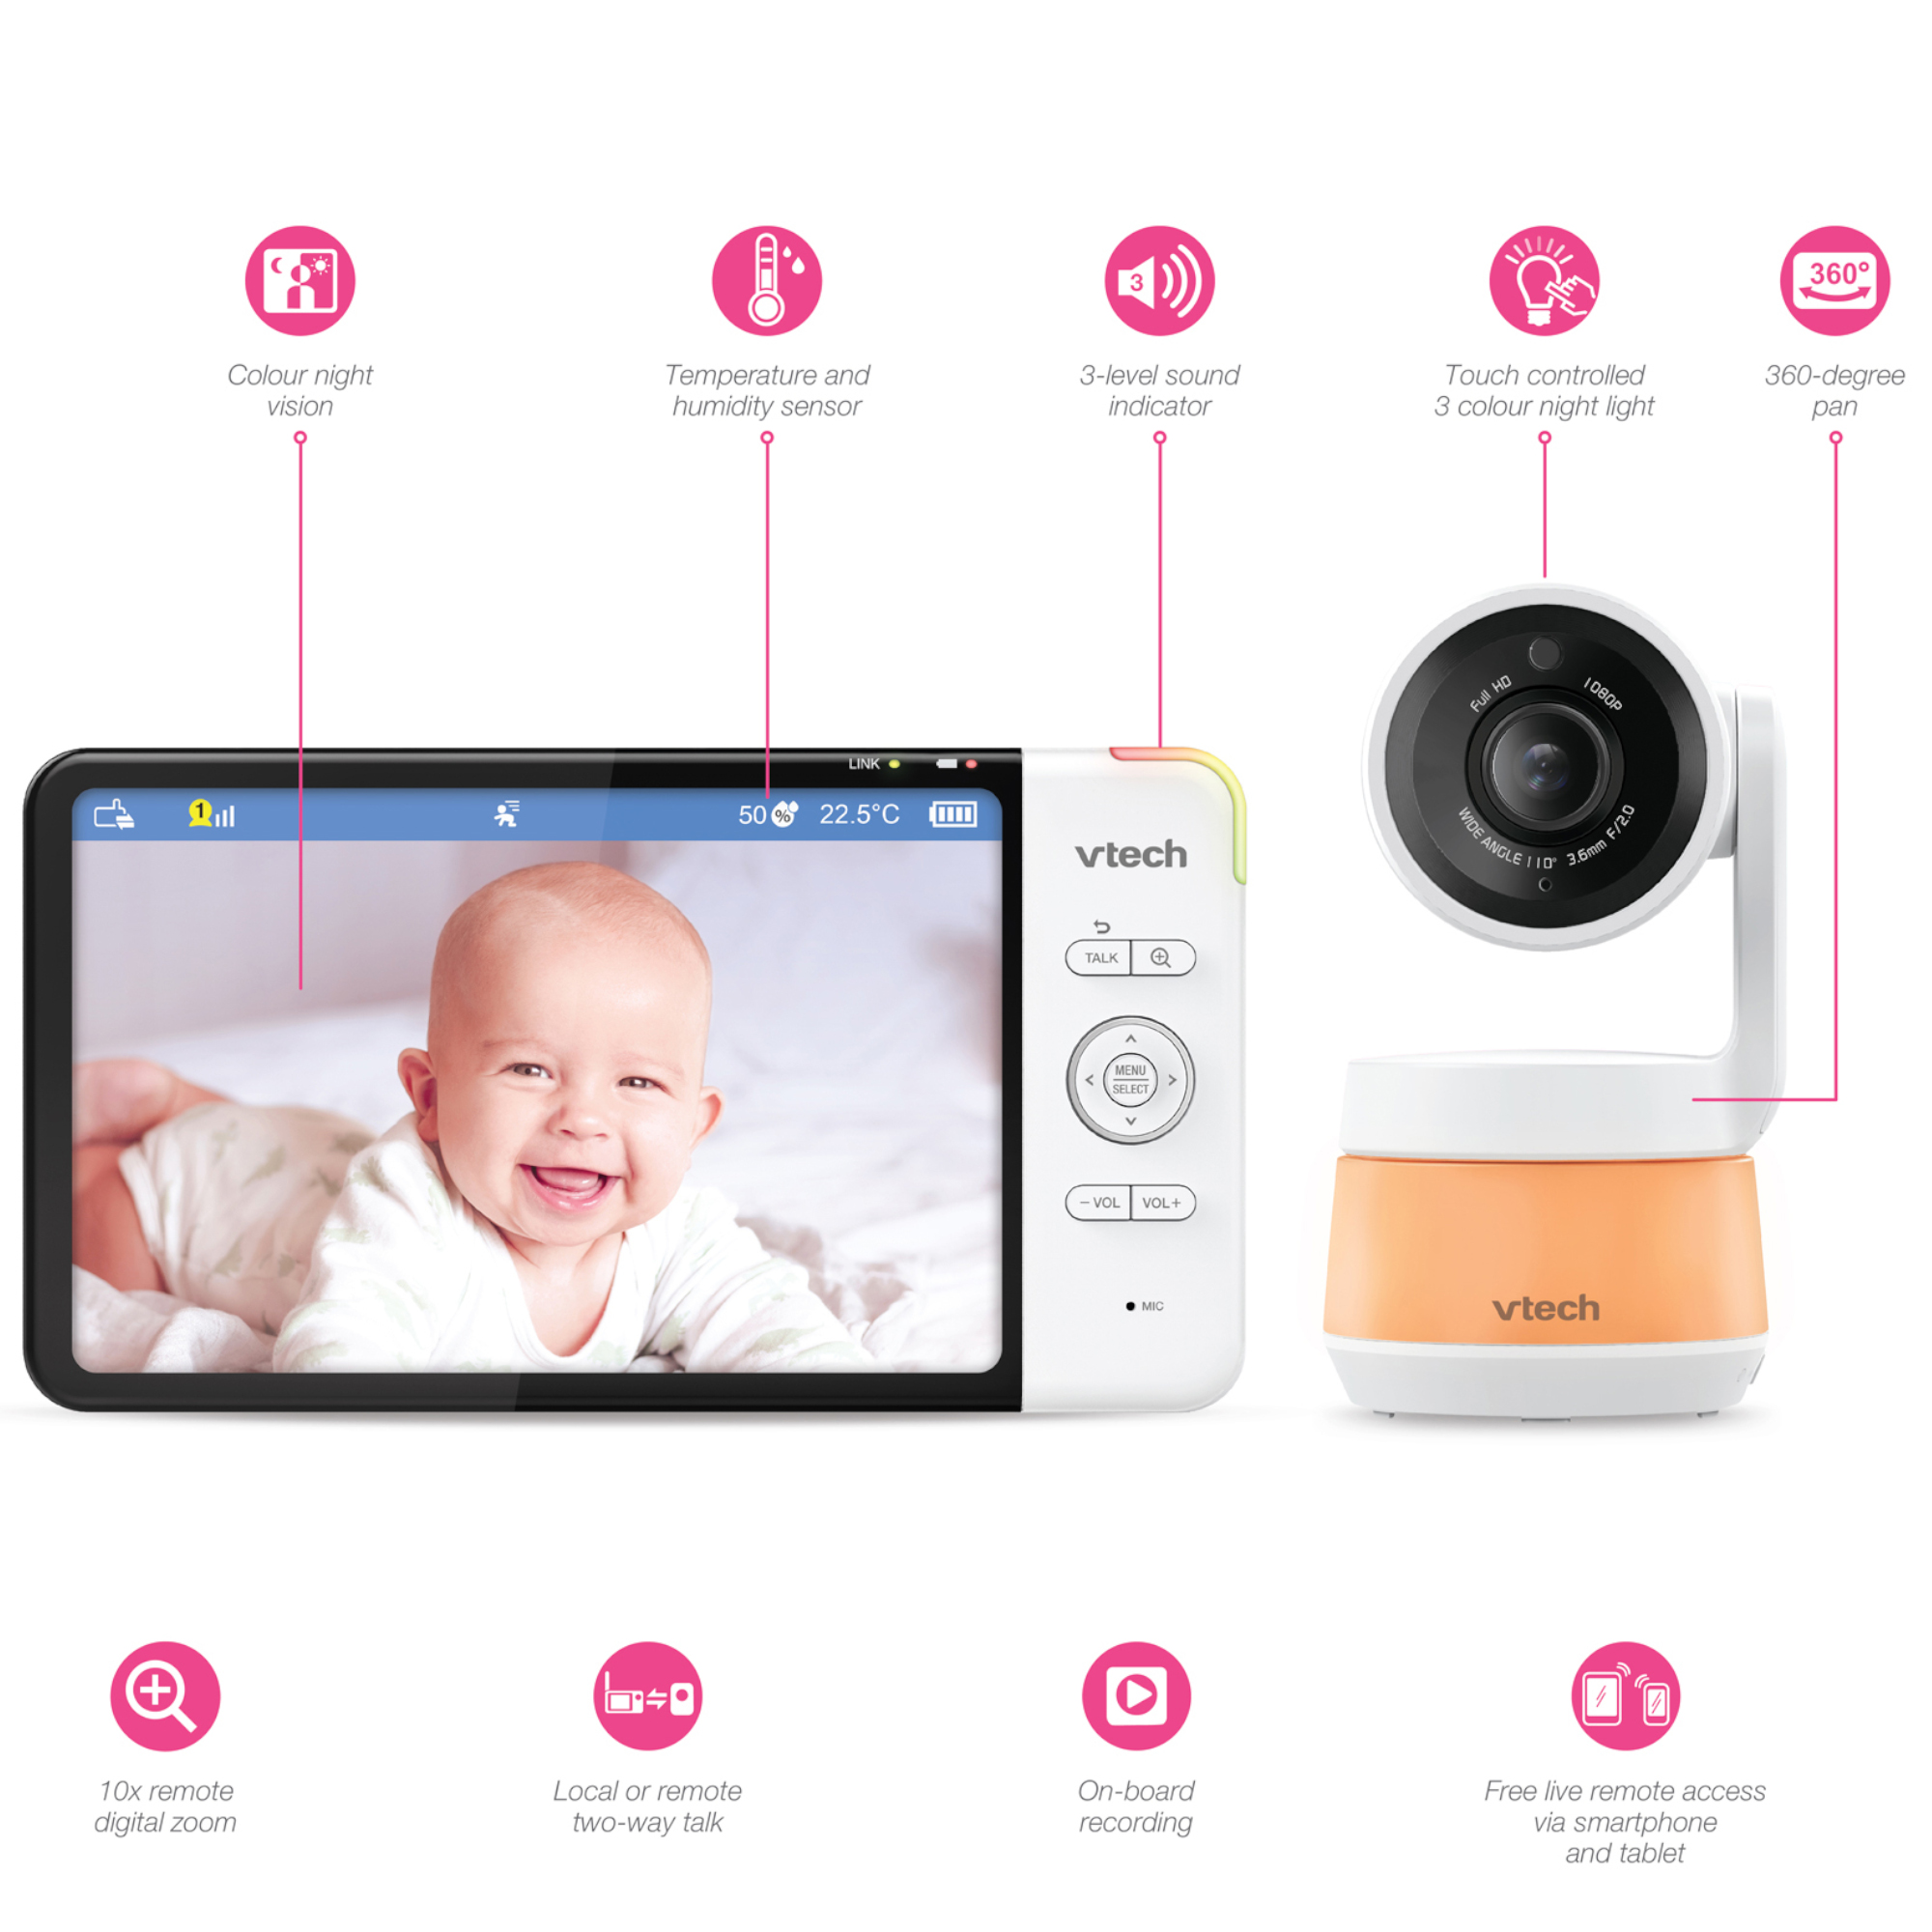 colour night vision, temperature and humidity sensor, 3 level sound indicator, touch controlled 3 colour night light, 360 degree pan, 10x remote digital zoom, locale or remote two way talk, on-board recording, free live remote access via smartphone and tablet.